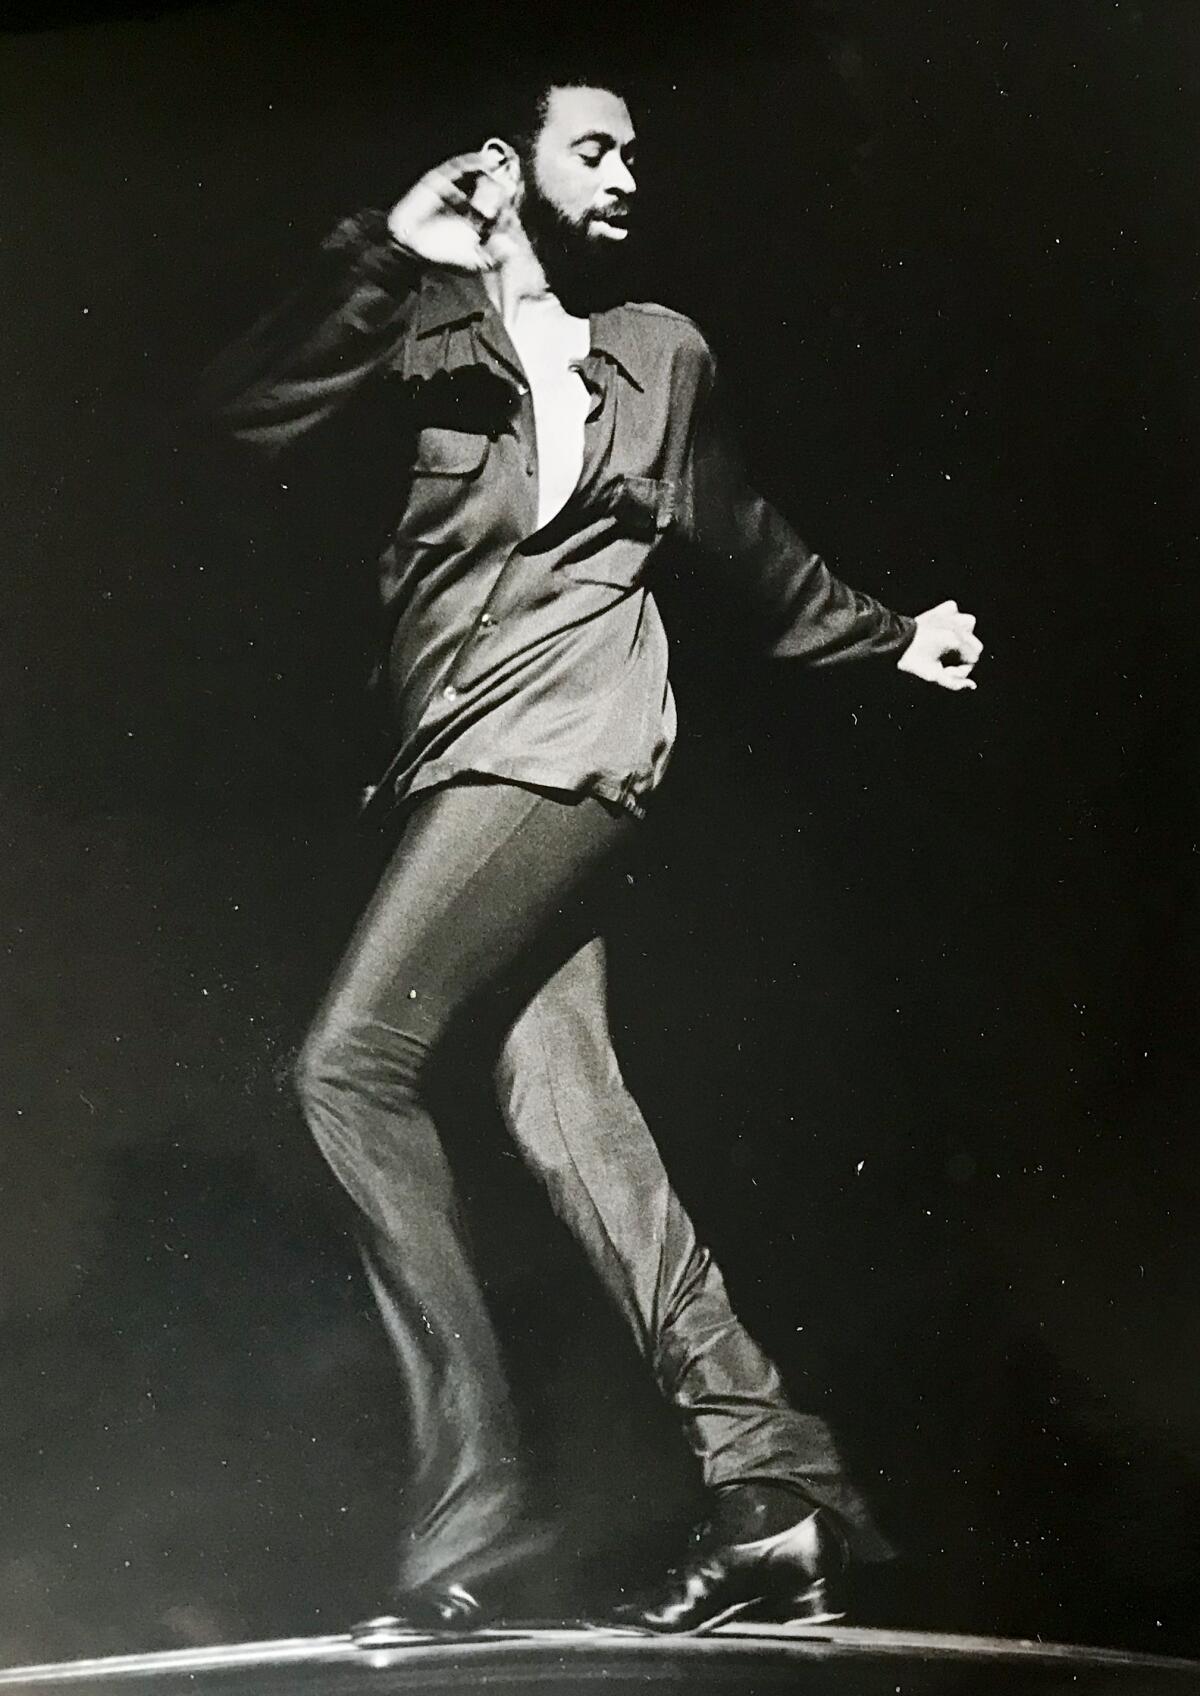 Maurice Hines strikes a dance pose, standing and twisting to his left, in tight-fitting dark shirt and slacks.